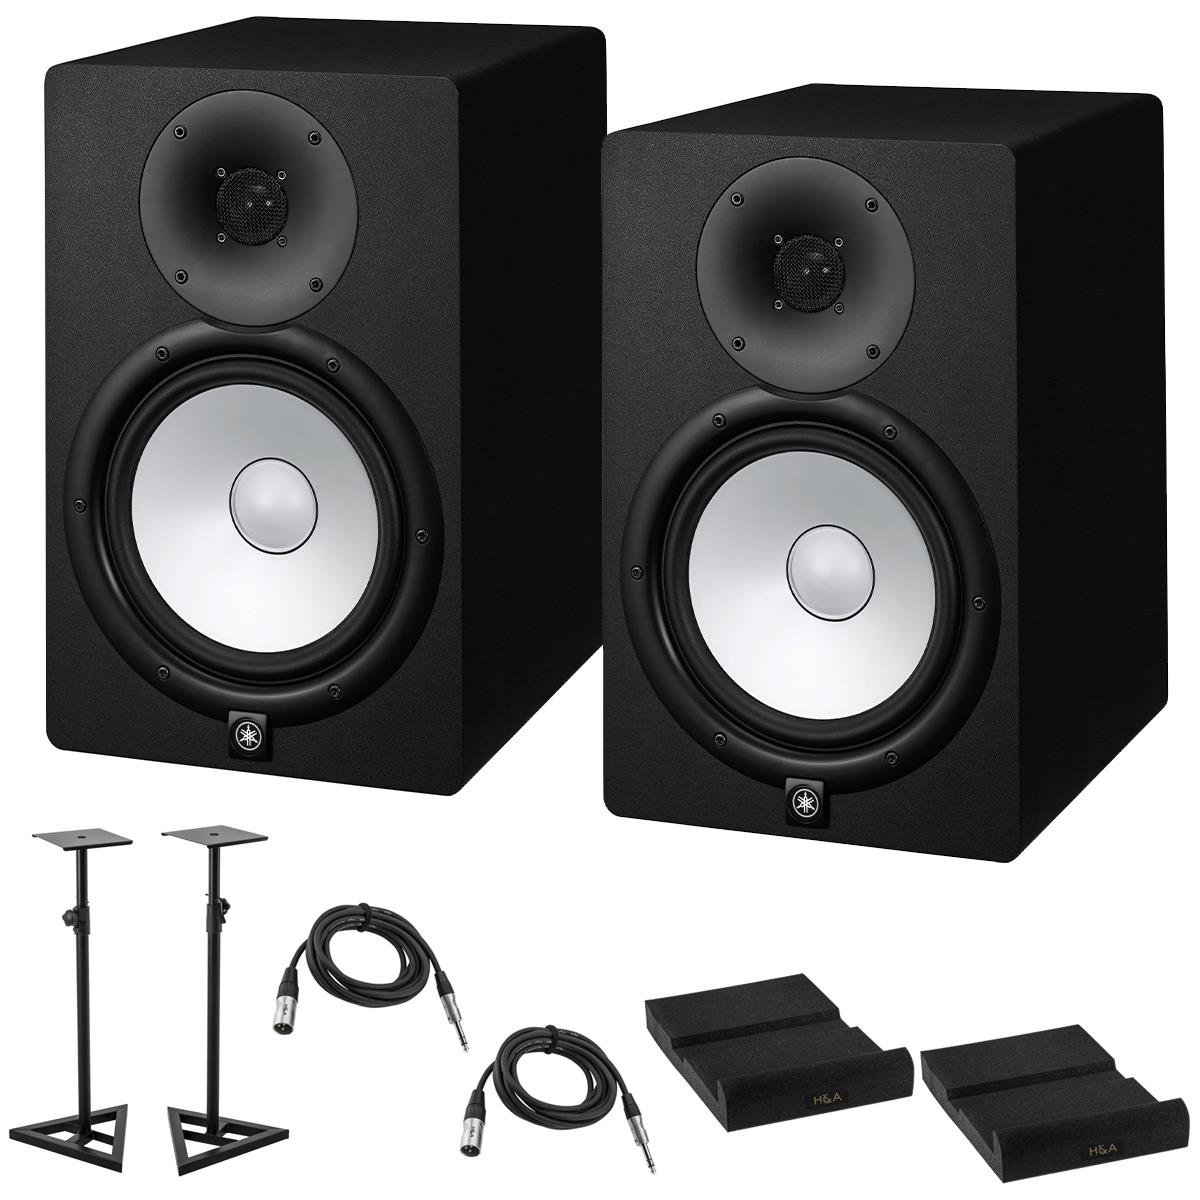 Yamaha 2x HS8 Powered Studio Monitor, Black with Accessories Kit -  HS8 AK